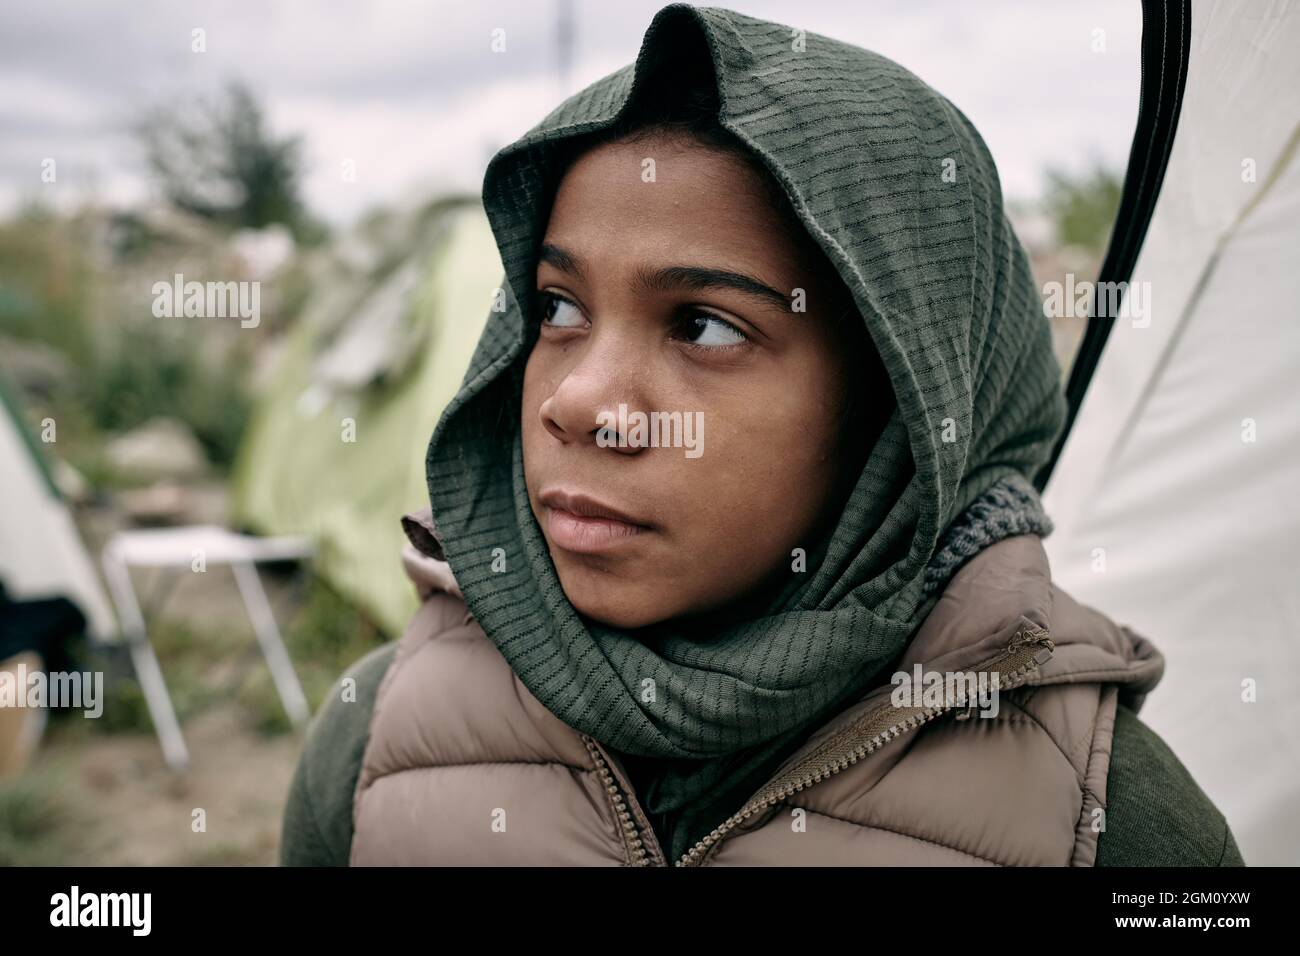 Sad Black refugee girl with covered head looking up hopefully, tent camp for migrant behind her Stock Photo